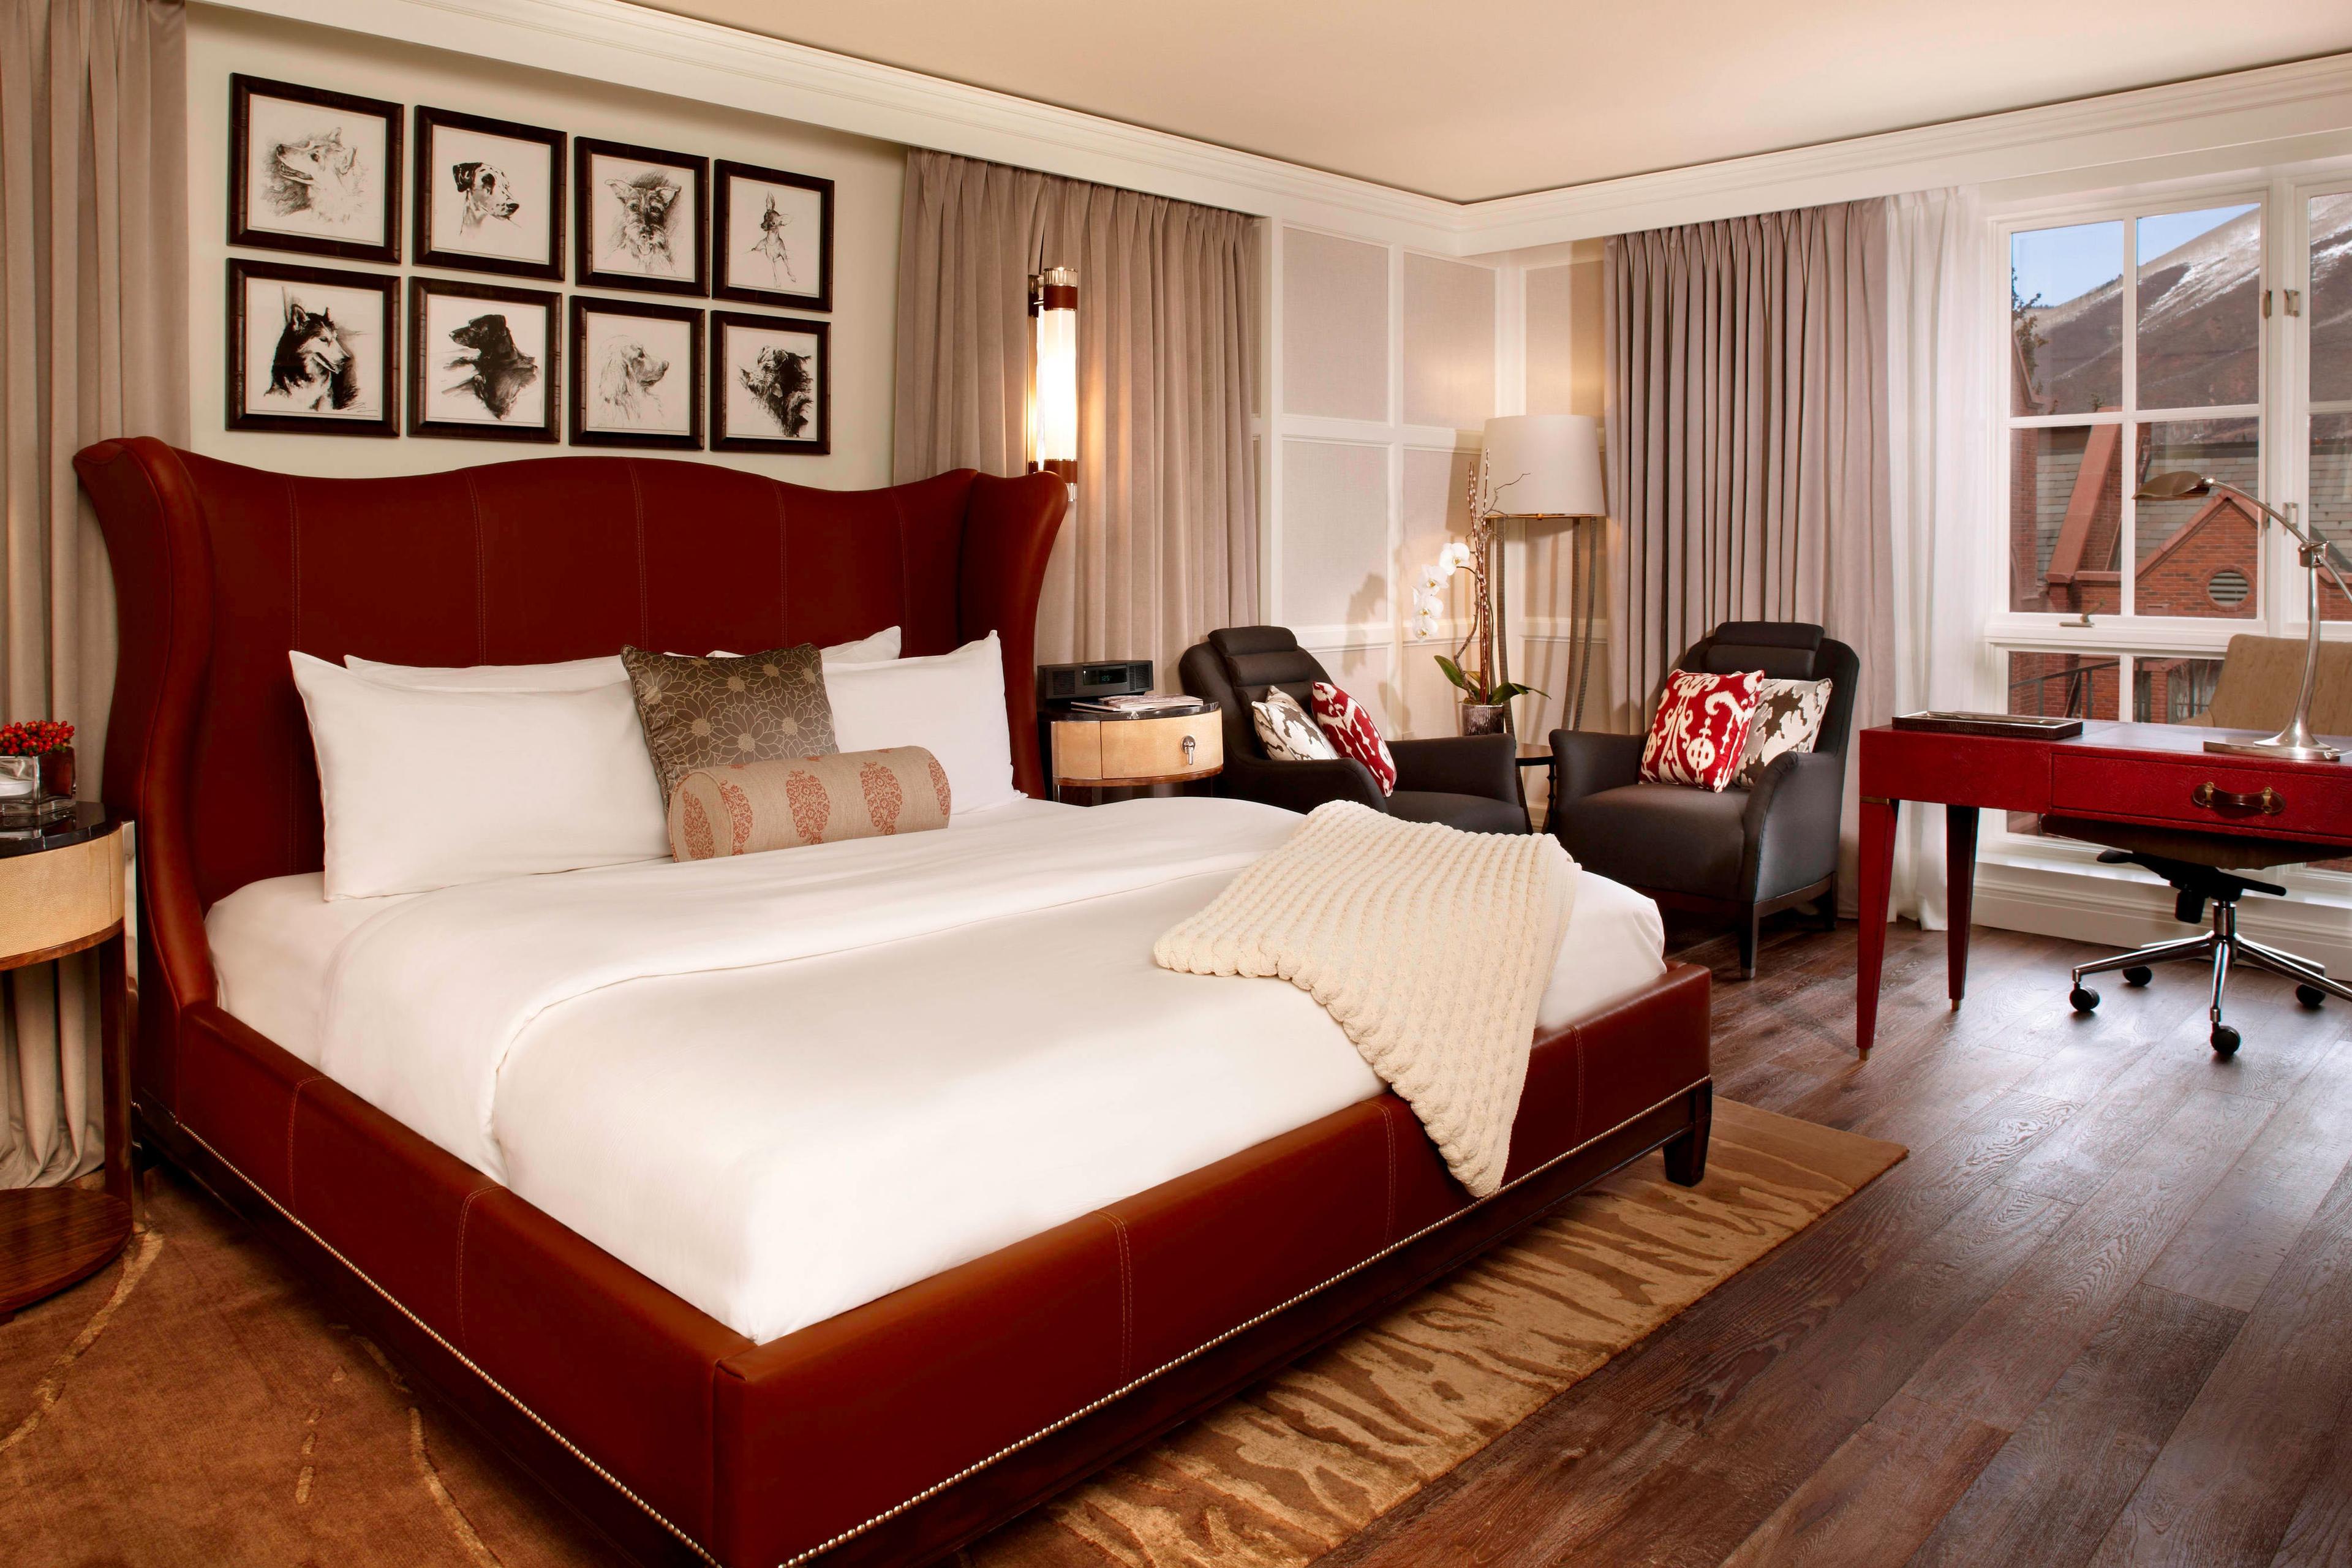 Make yourself comfortable in our Deluxe King Guest Room, outfitted with custom furnishings, including a leather bed and desk designed by Ralph Lauren.